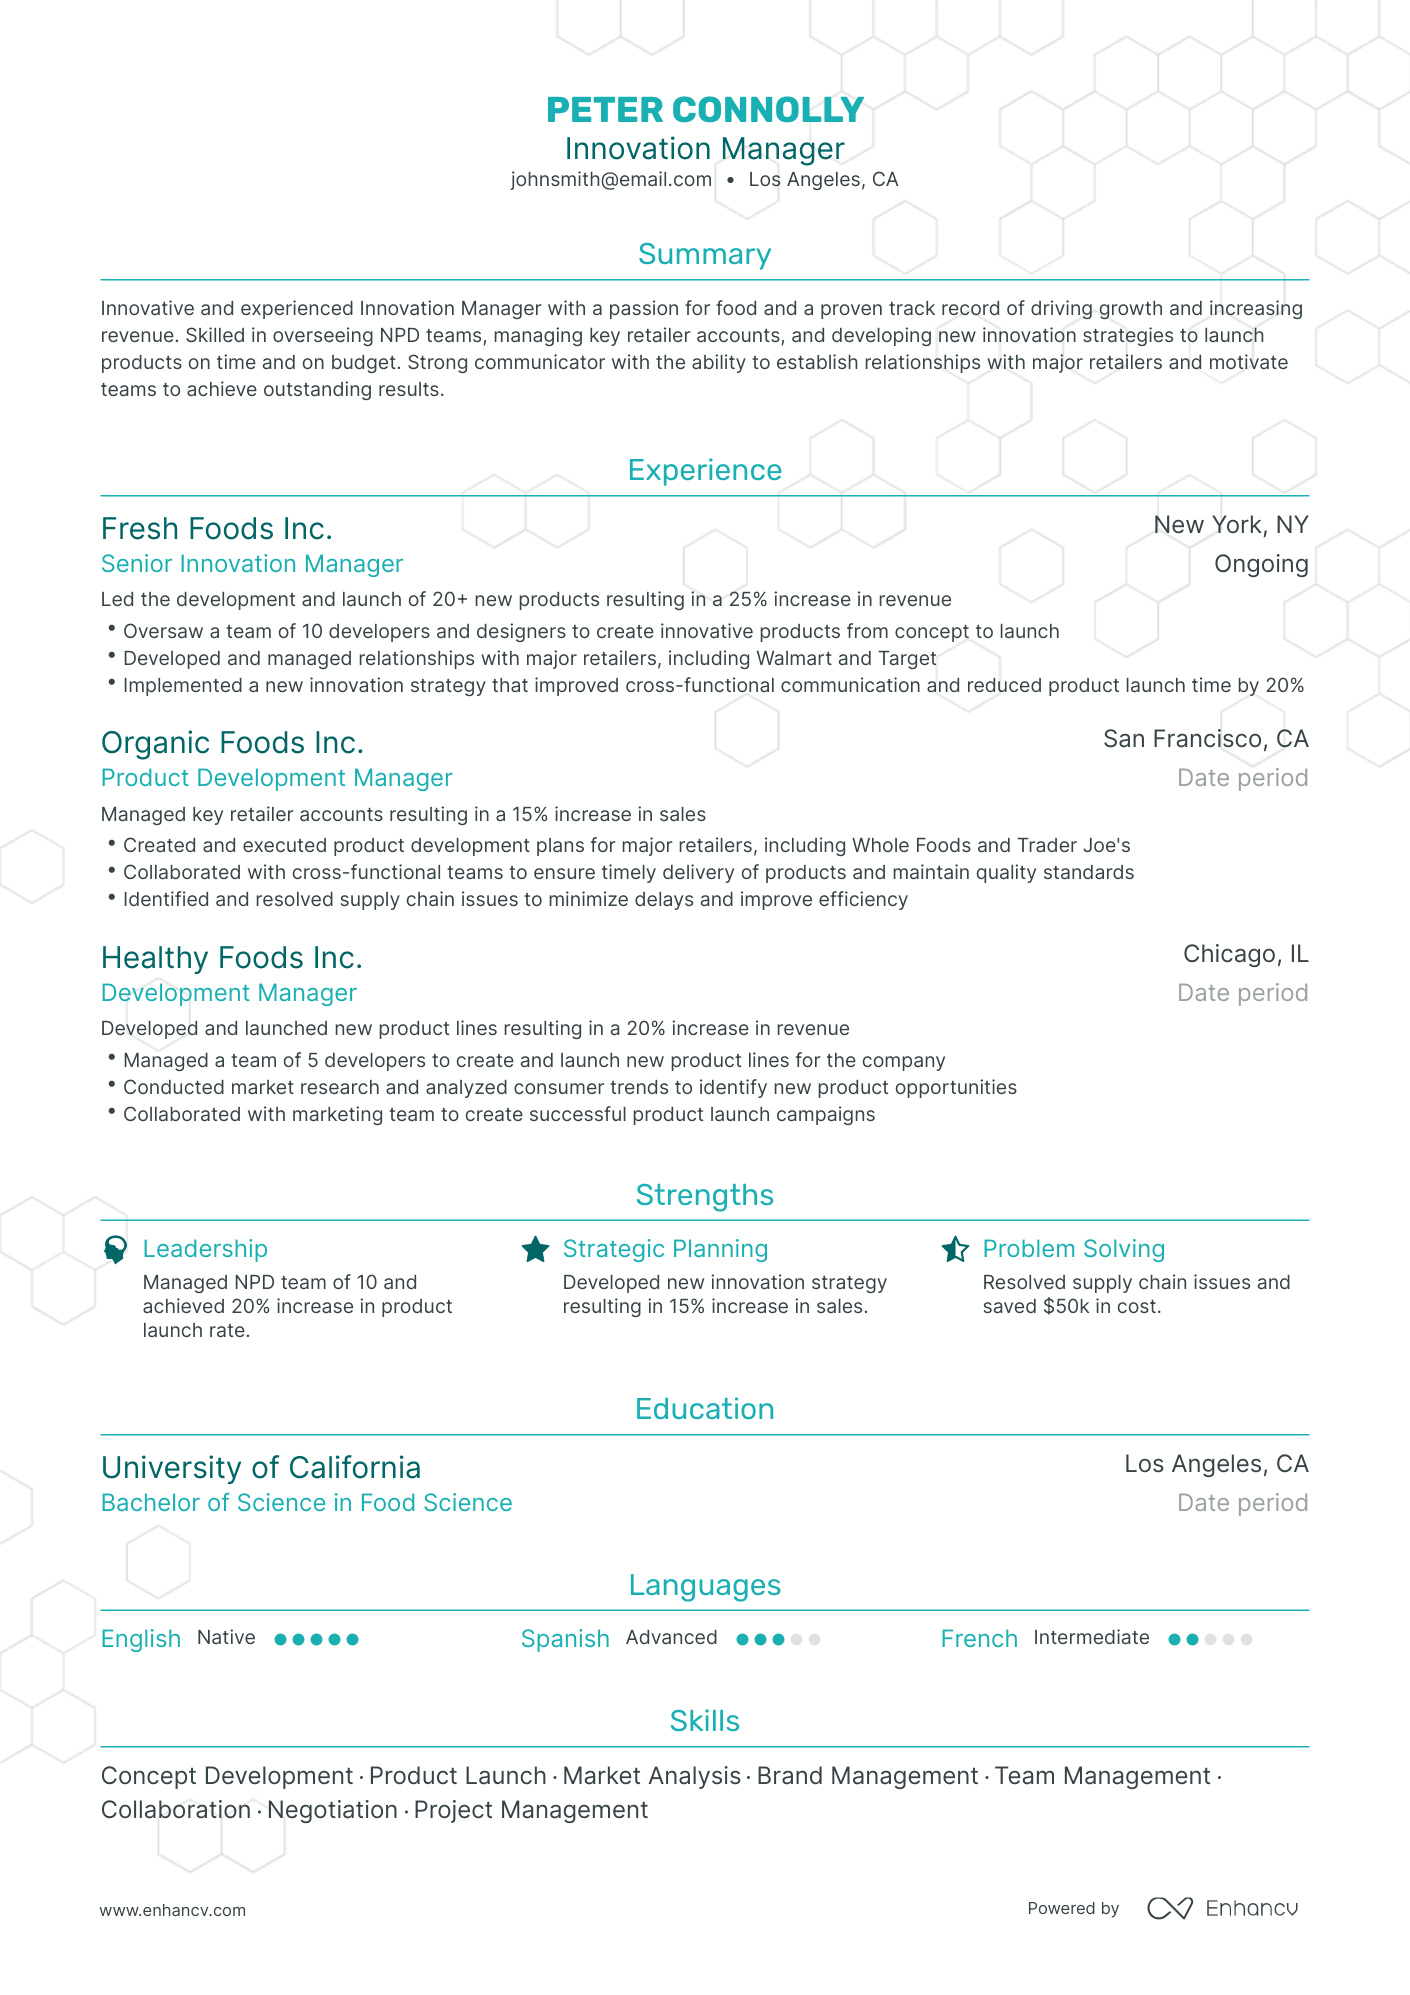 Traditional Innovation Manager Resume Template